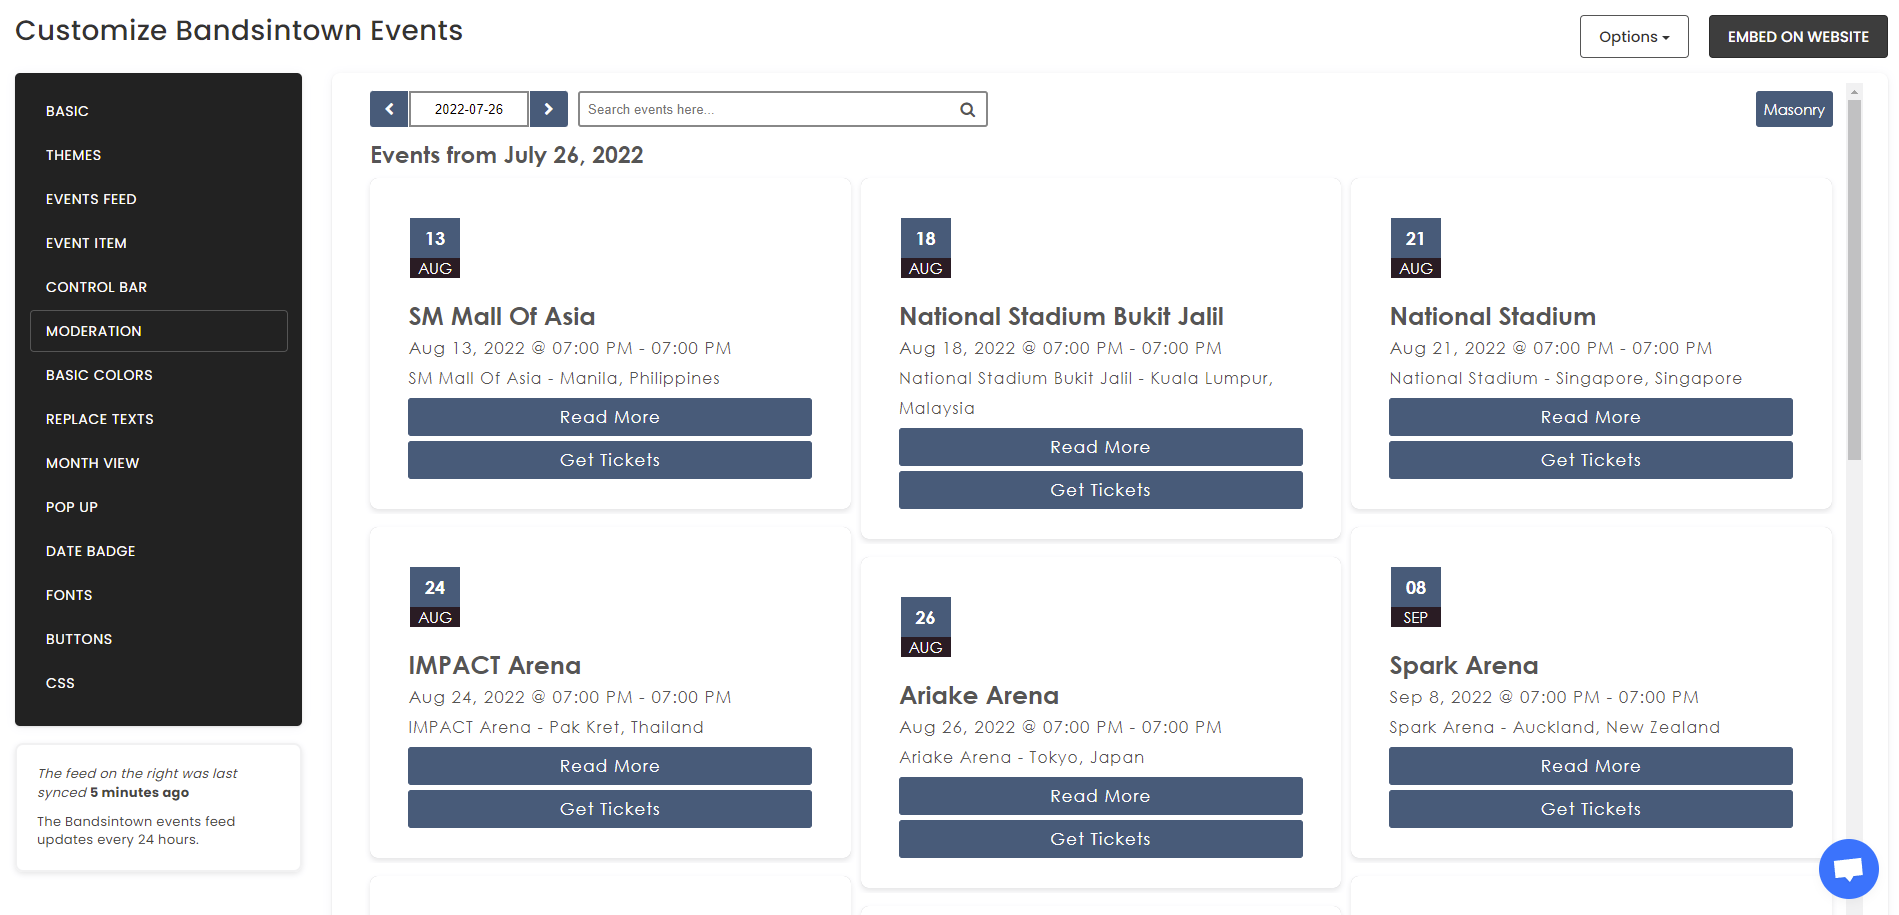 Customize your feed - Free Bandsintown Events Widget For Squarespace Website